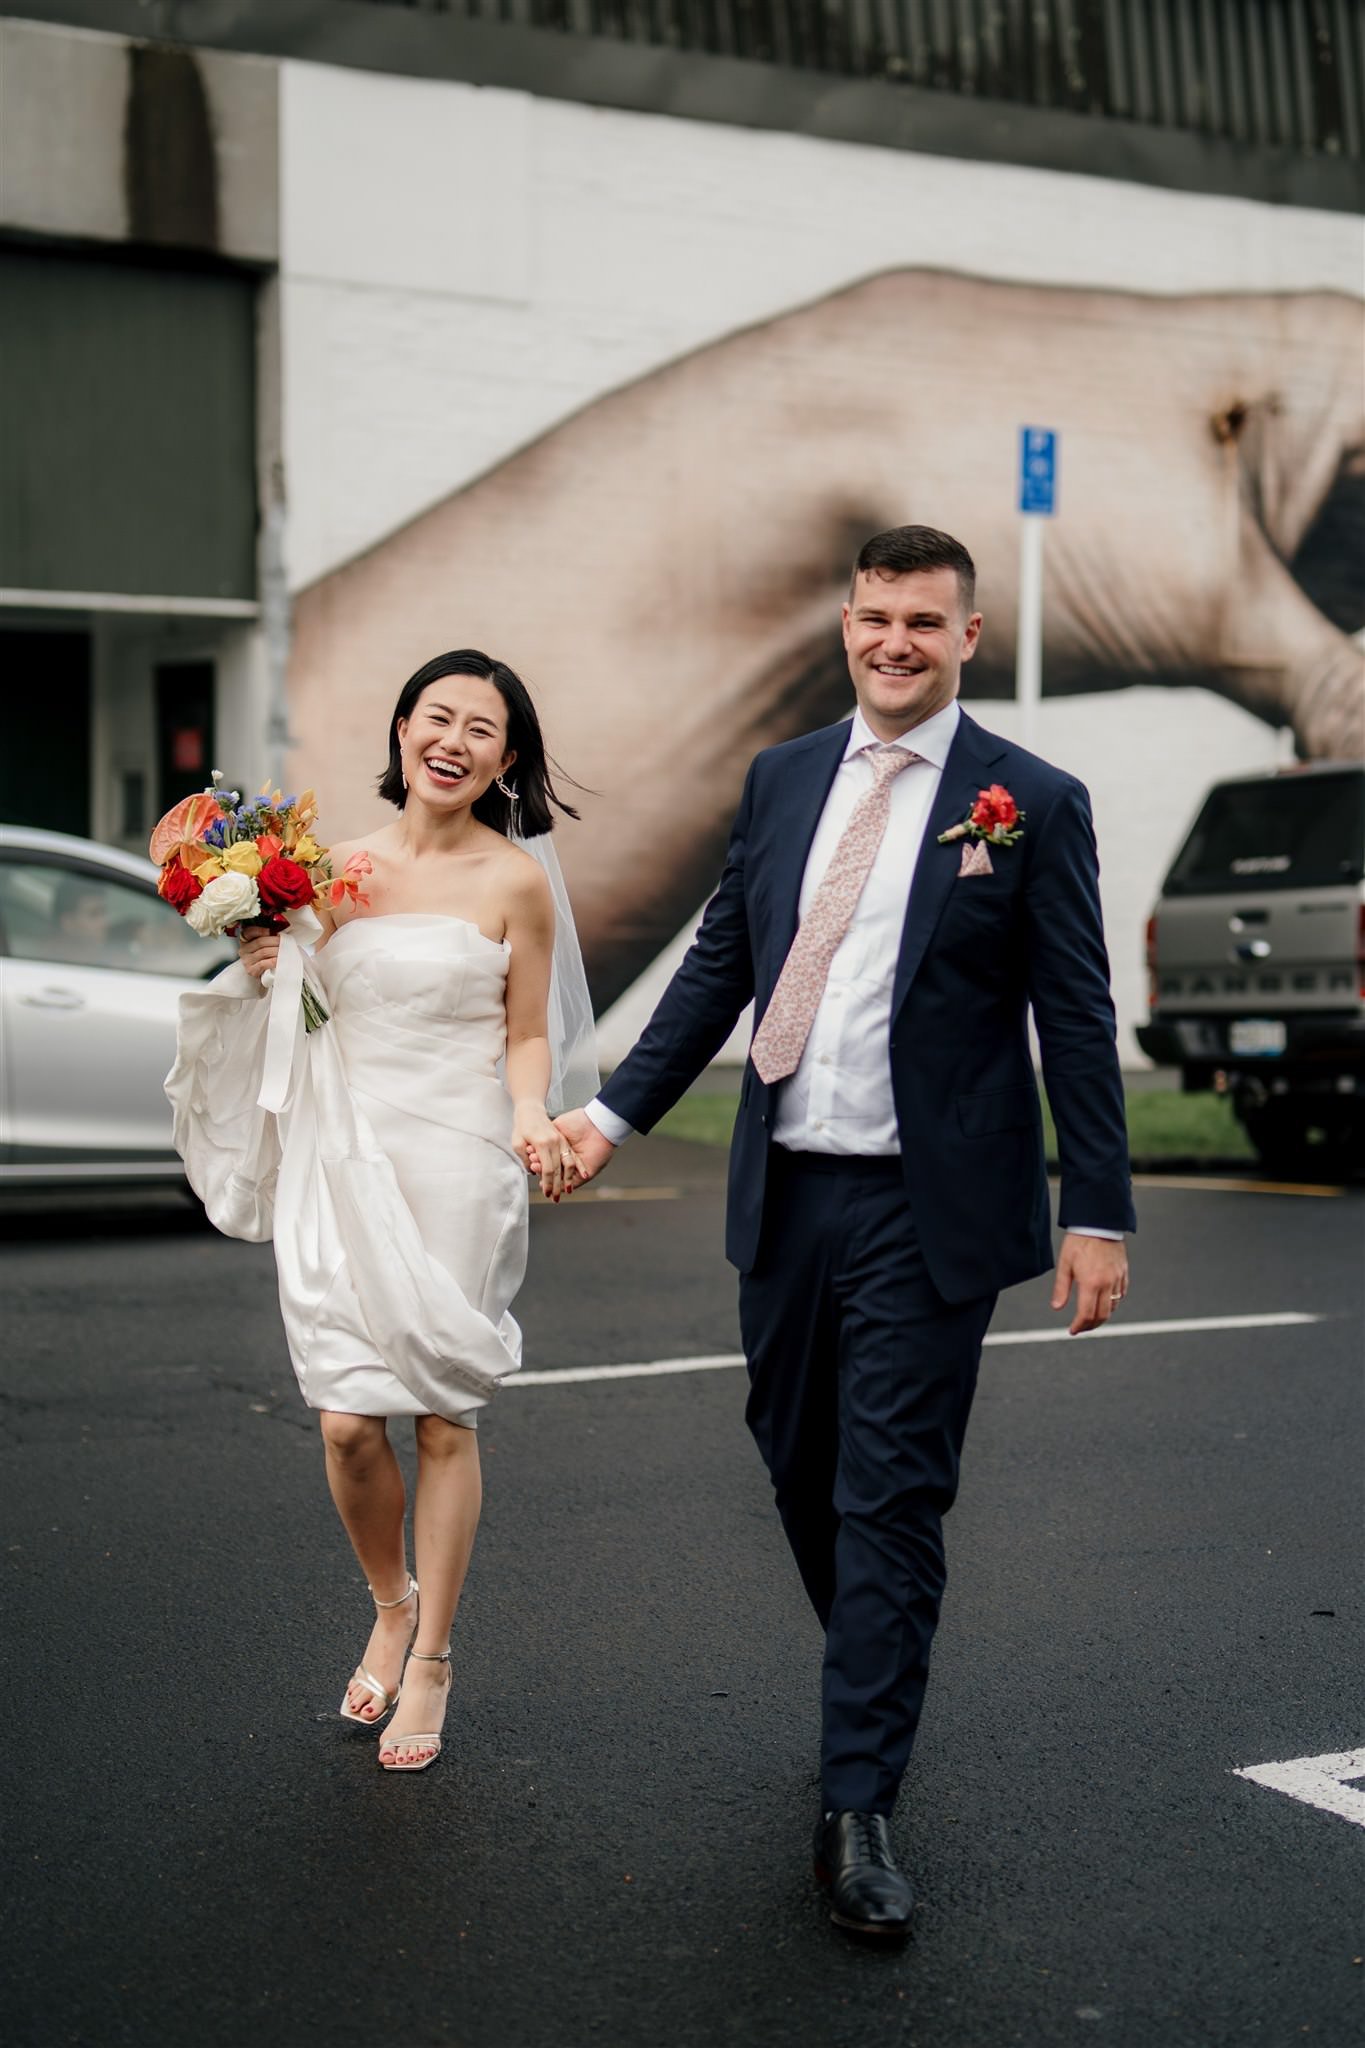 glasshouse-morningside-urban-best-auckland-wedding-venue-central-indoor-photographer-videographer-dear-white-productions-top-industrial-chinese-ceremony-tradition (113).jpg